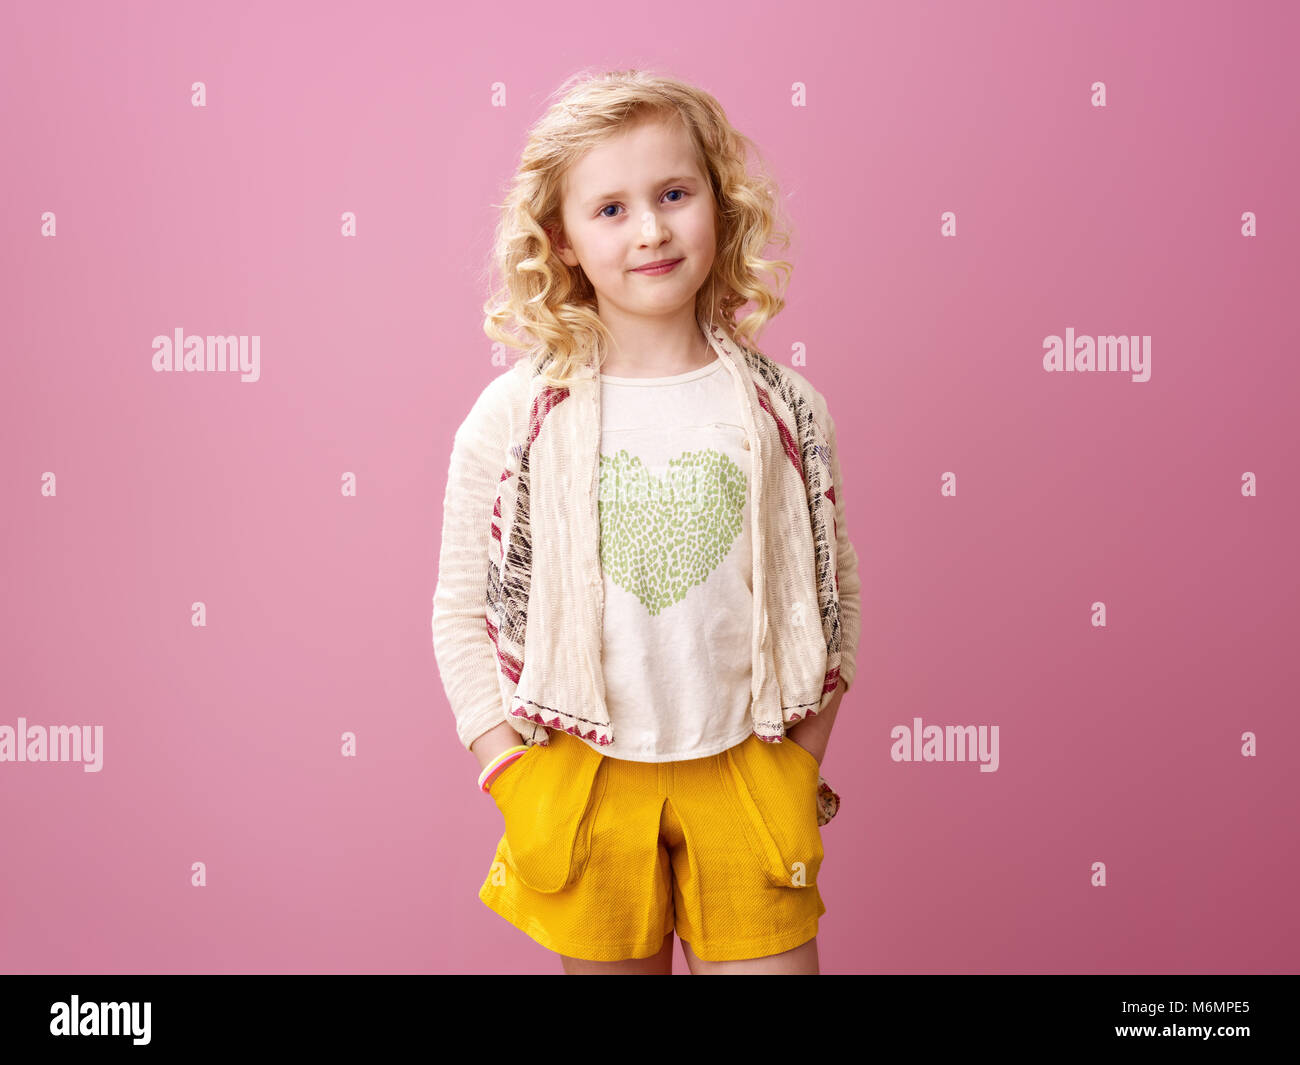 5. Wavy Blonde Hair Girl Stock Photos, Pictures & Royalty-Free Images - iStock - wide 6